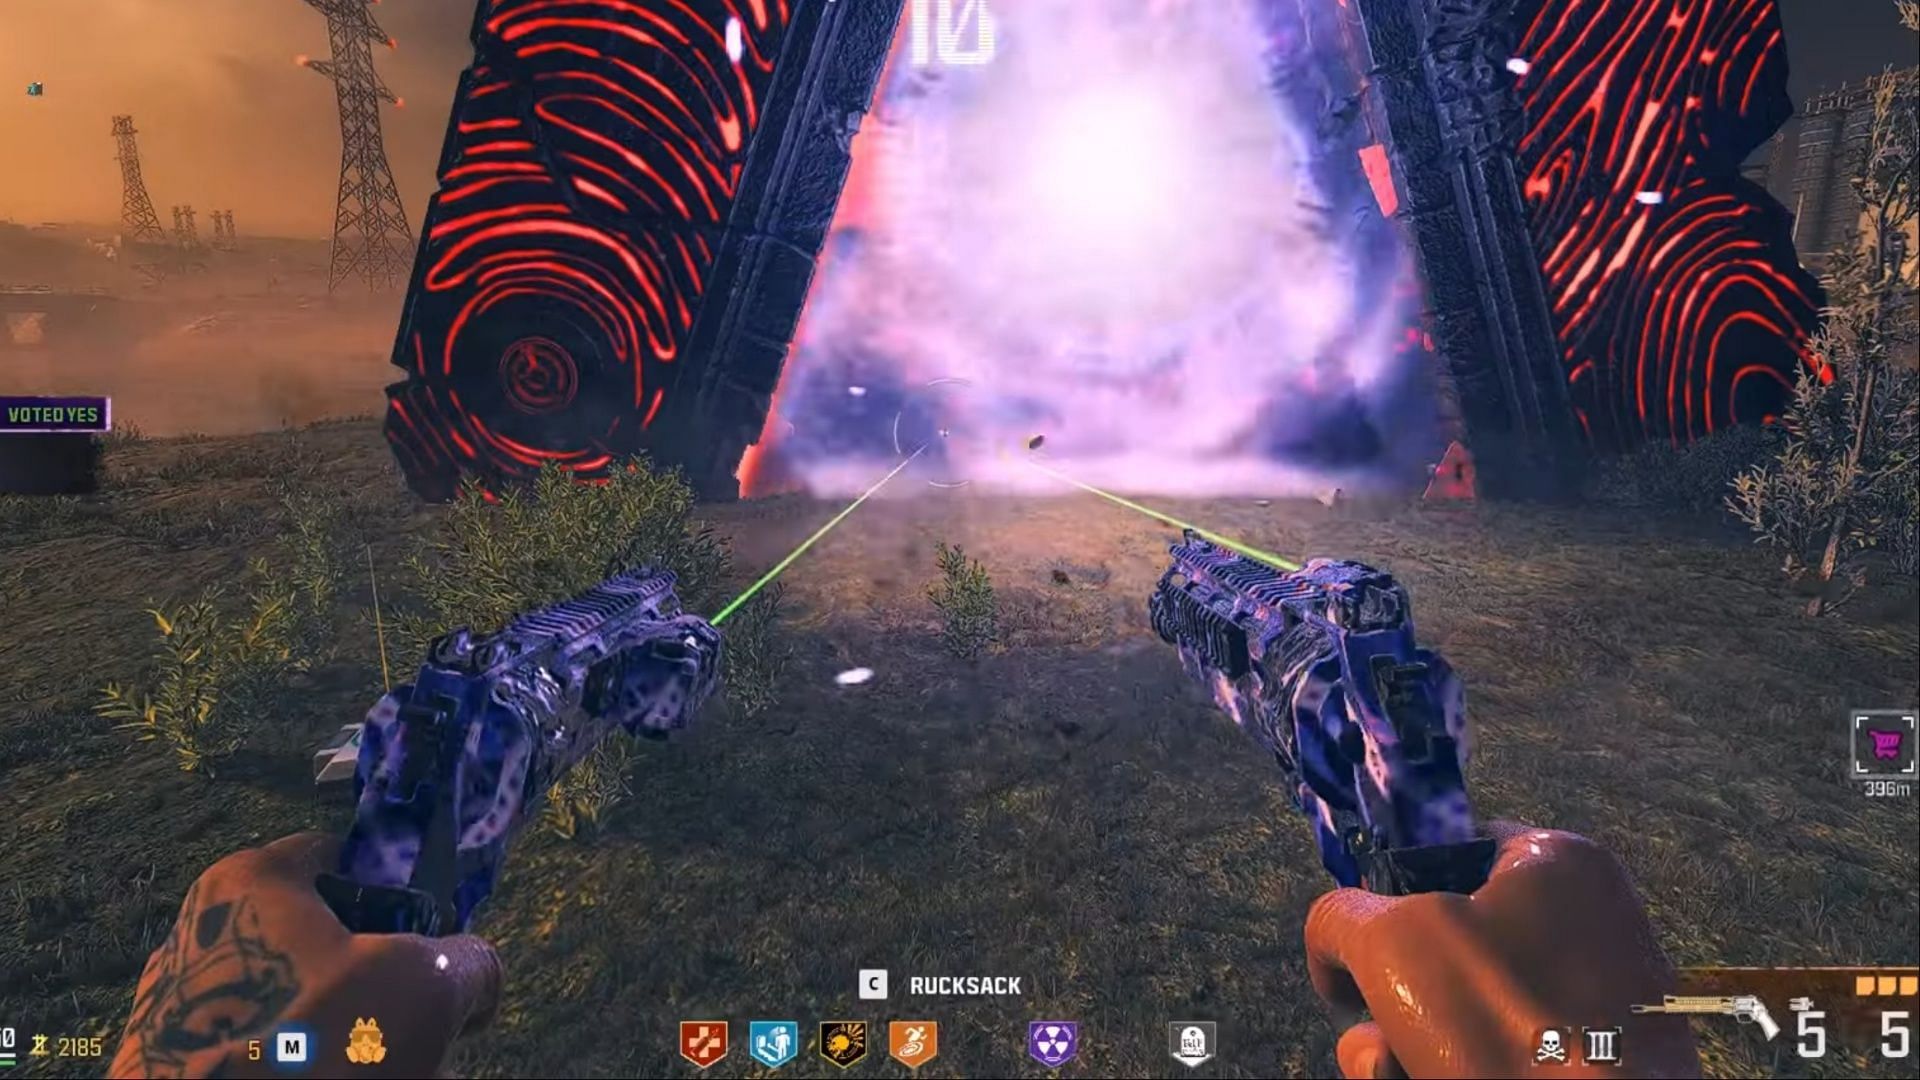 Dark Aether portal in Modern Warfare 3 Zombies (Image via Activision and youtube.com/@ llStevell)